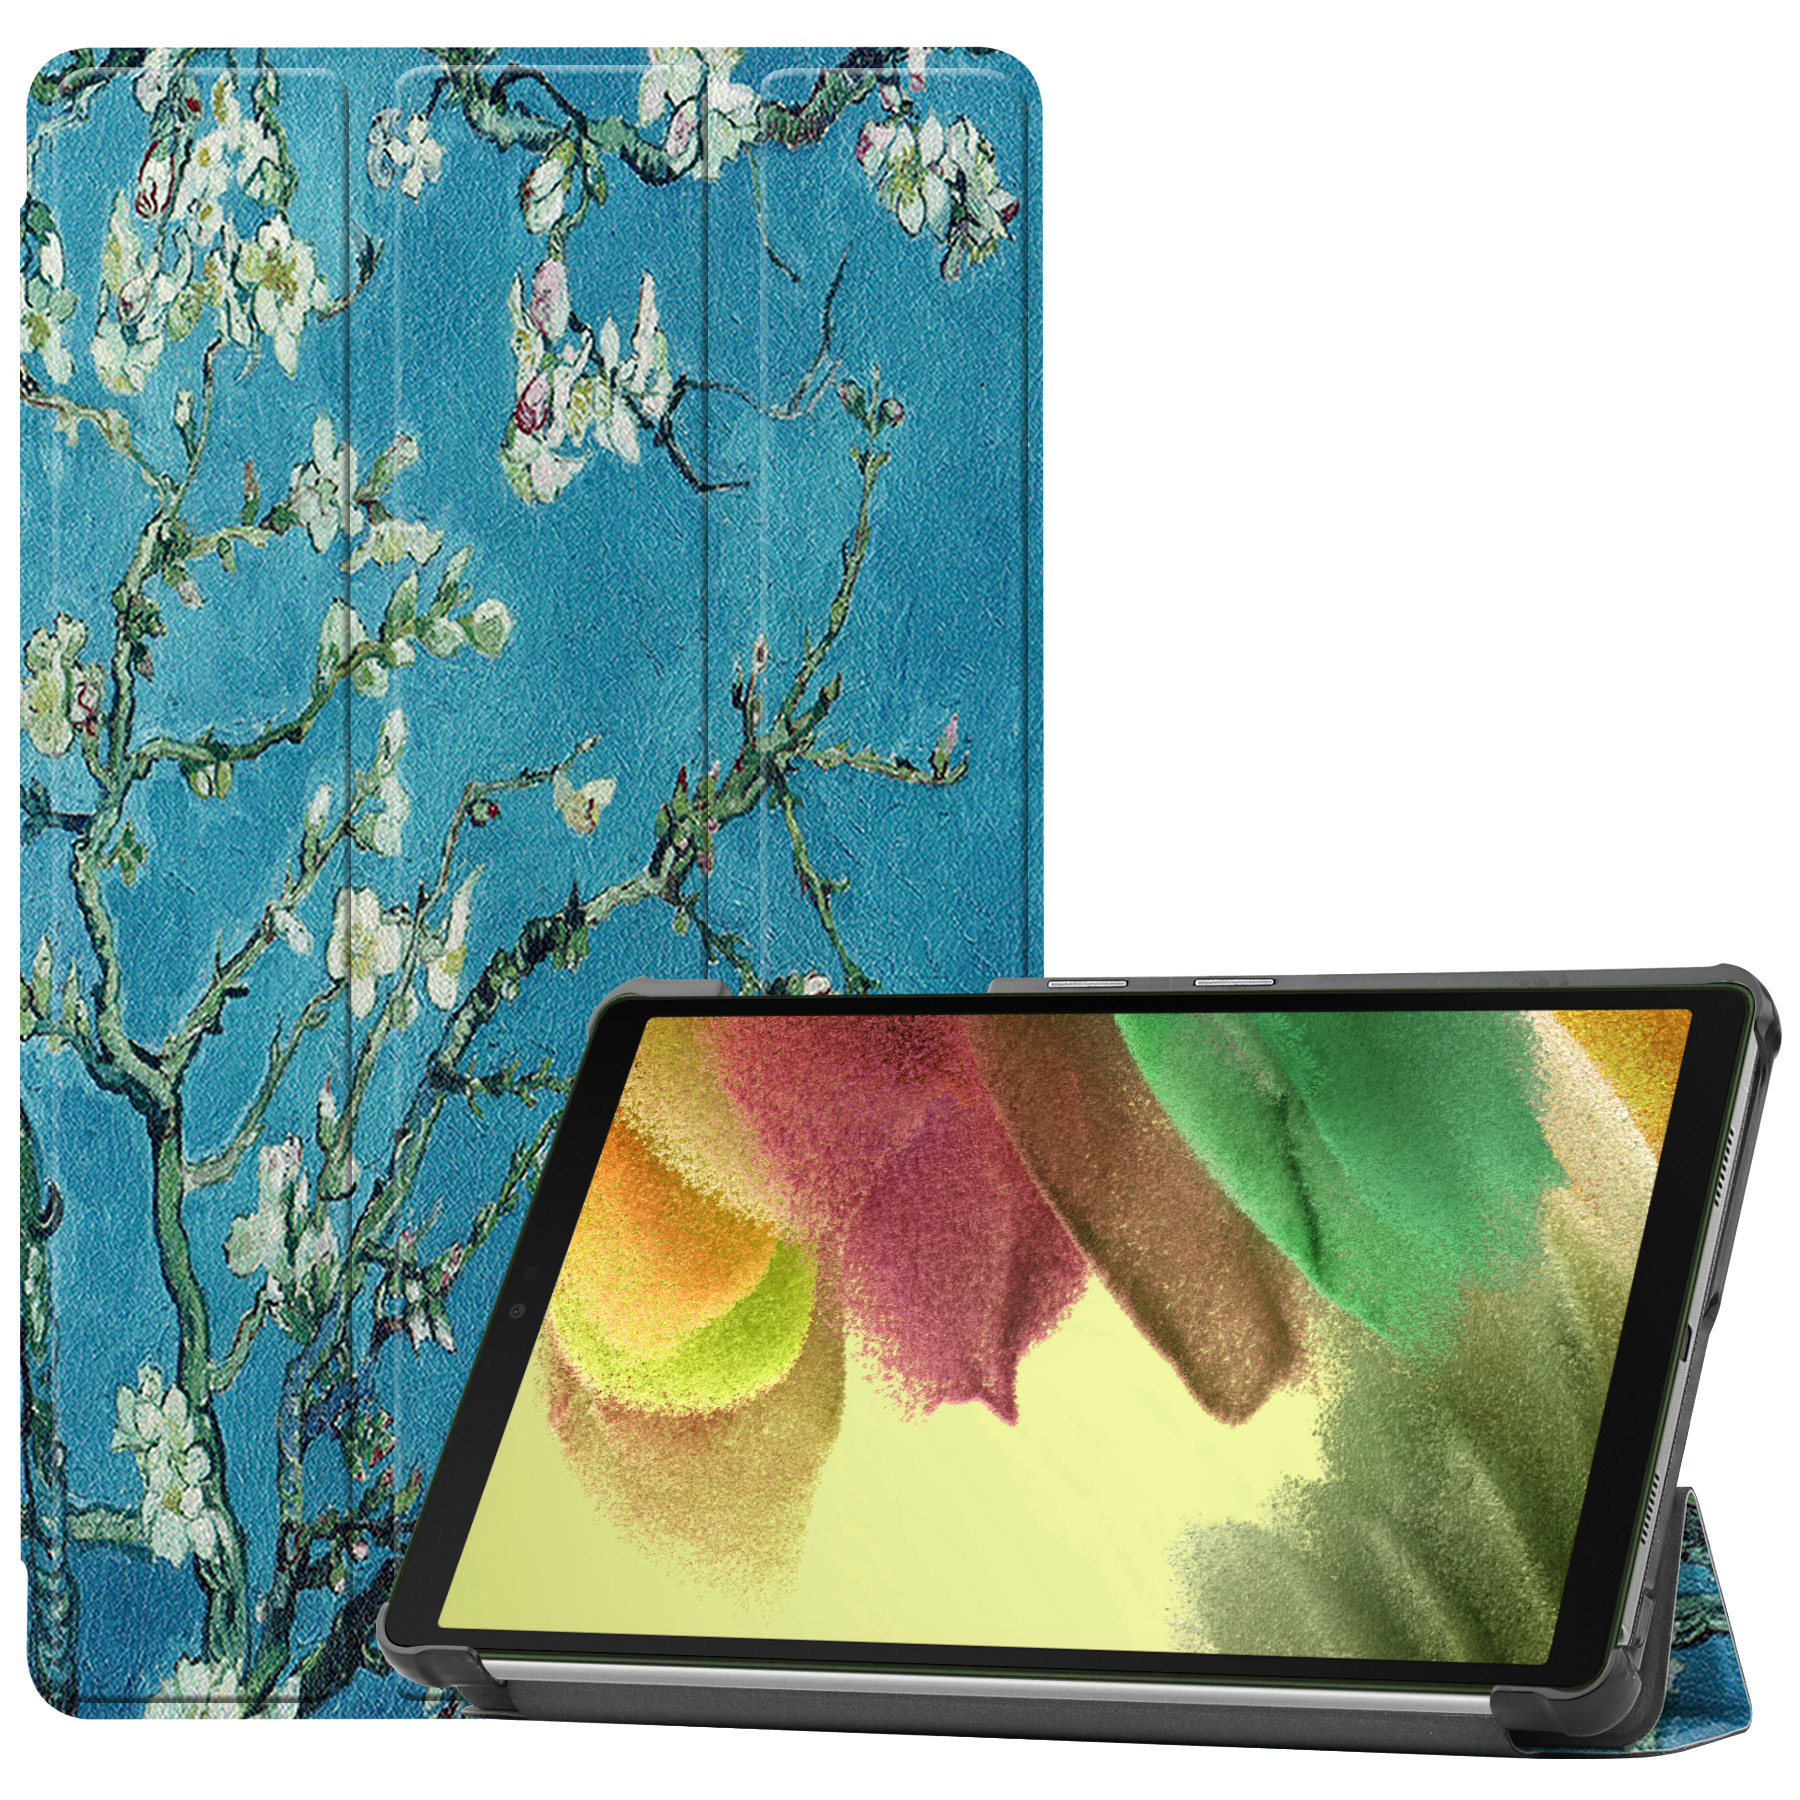 Nomfy Samsung Tab S6 Lite Hoesje Book Case Hoes - Samsung Galaxy Tab S6 Lite Hoes Hardcover Hoesje - Bloesem